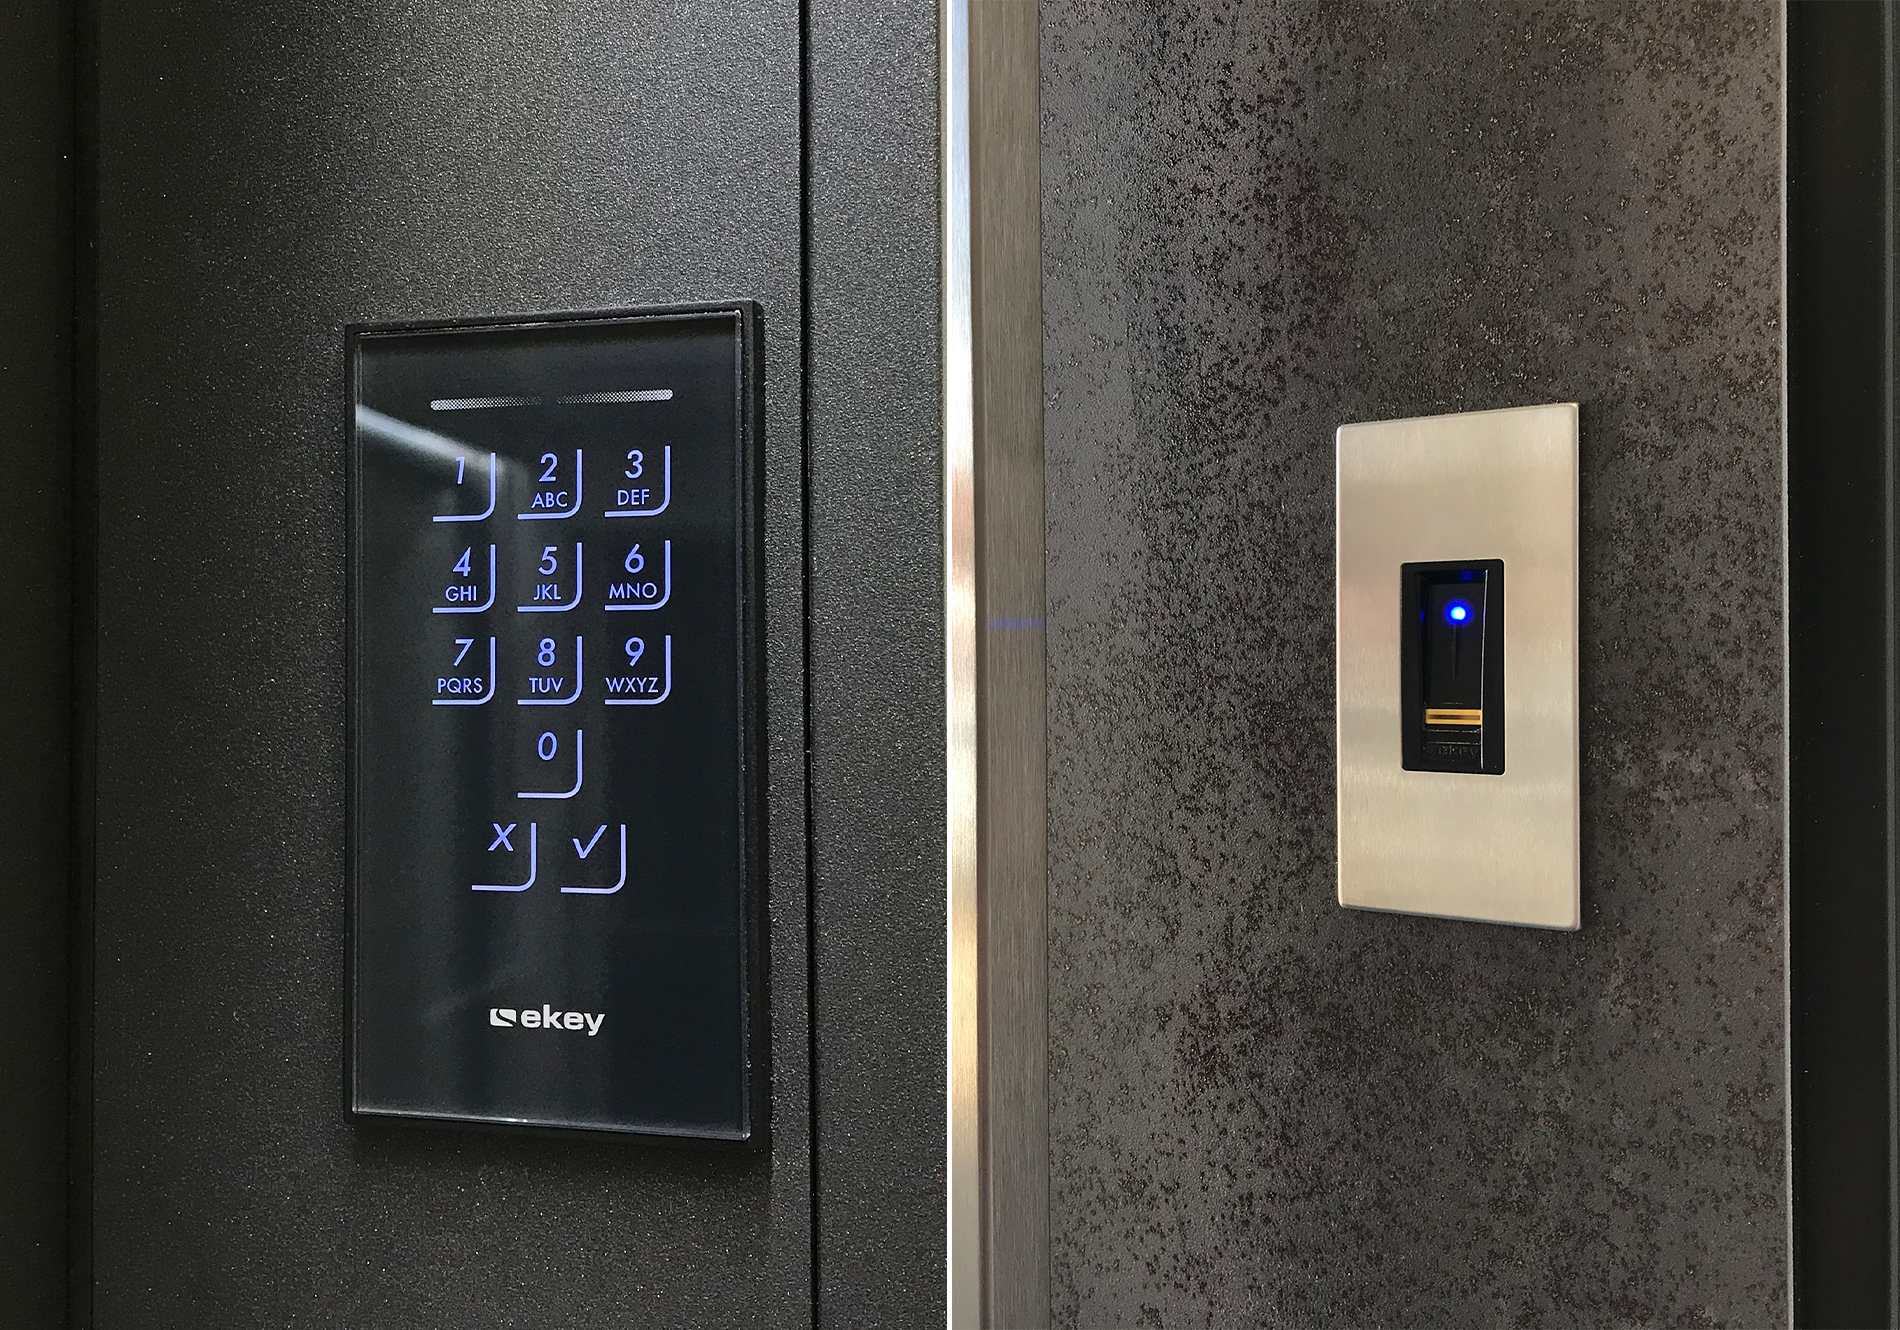 fingerprint scanner and keypade home automation entry systems fro entrance doors